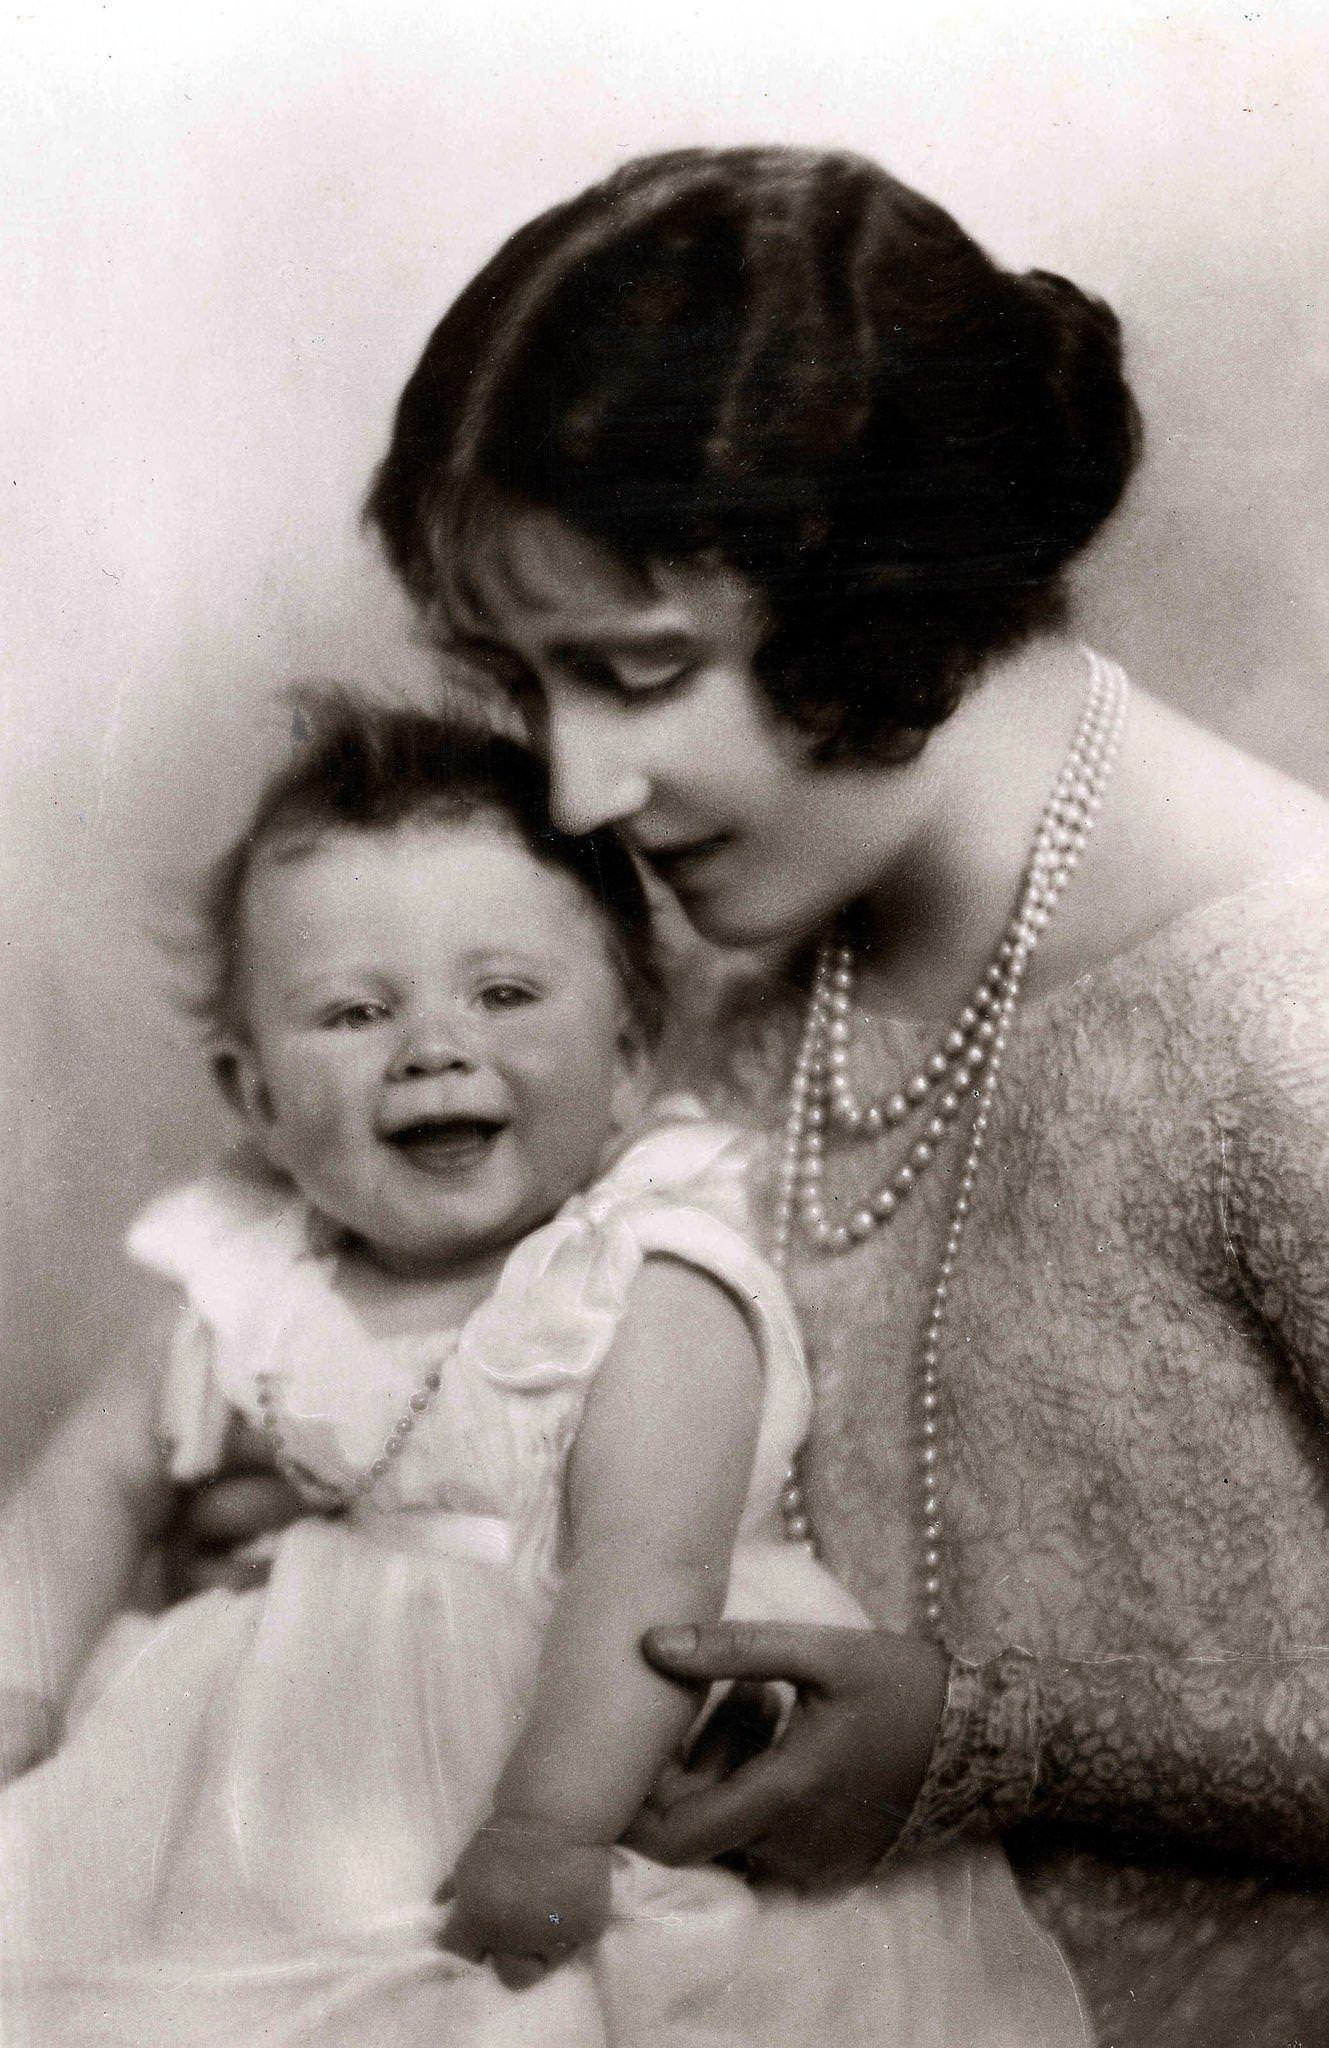 The Queen Mother with her baby daughter Princess Elizabeth, 1926.